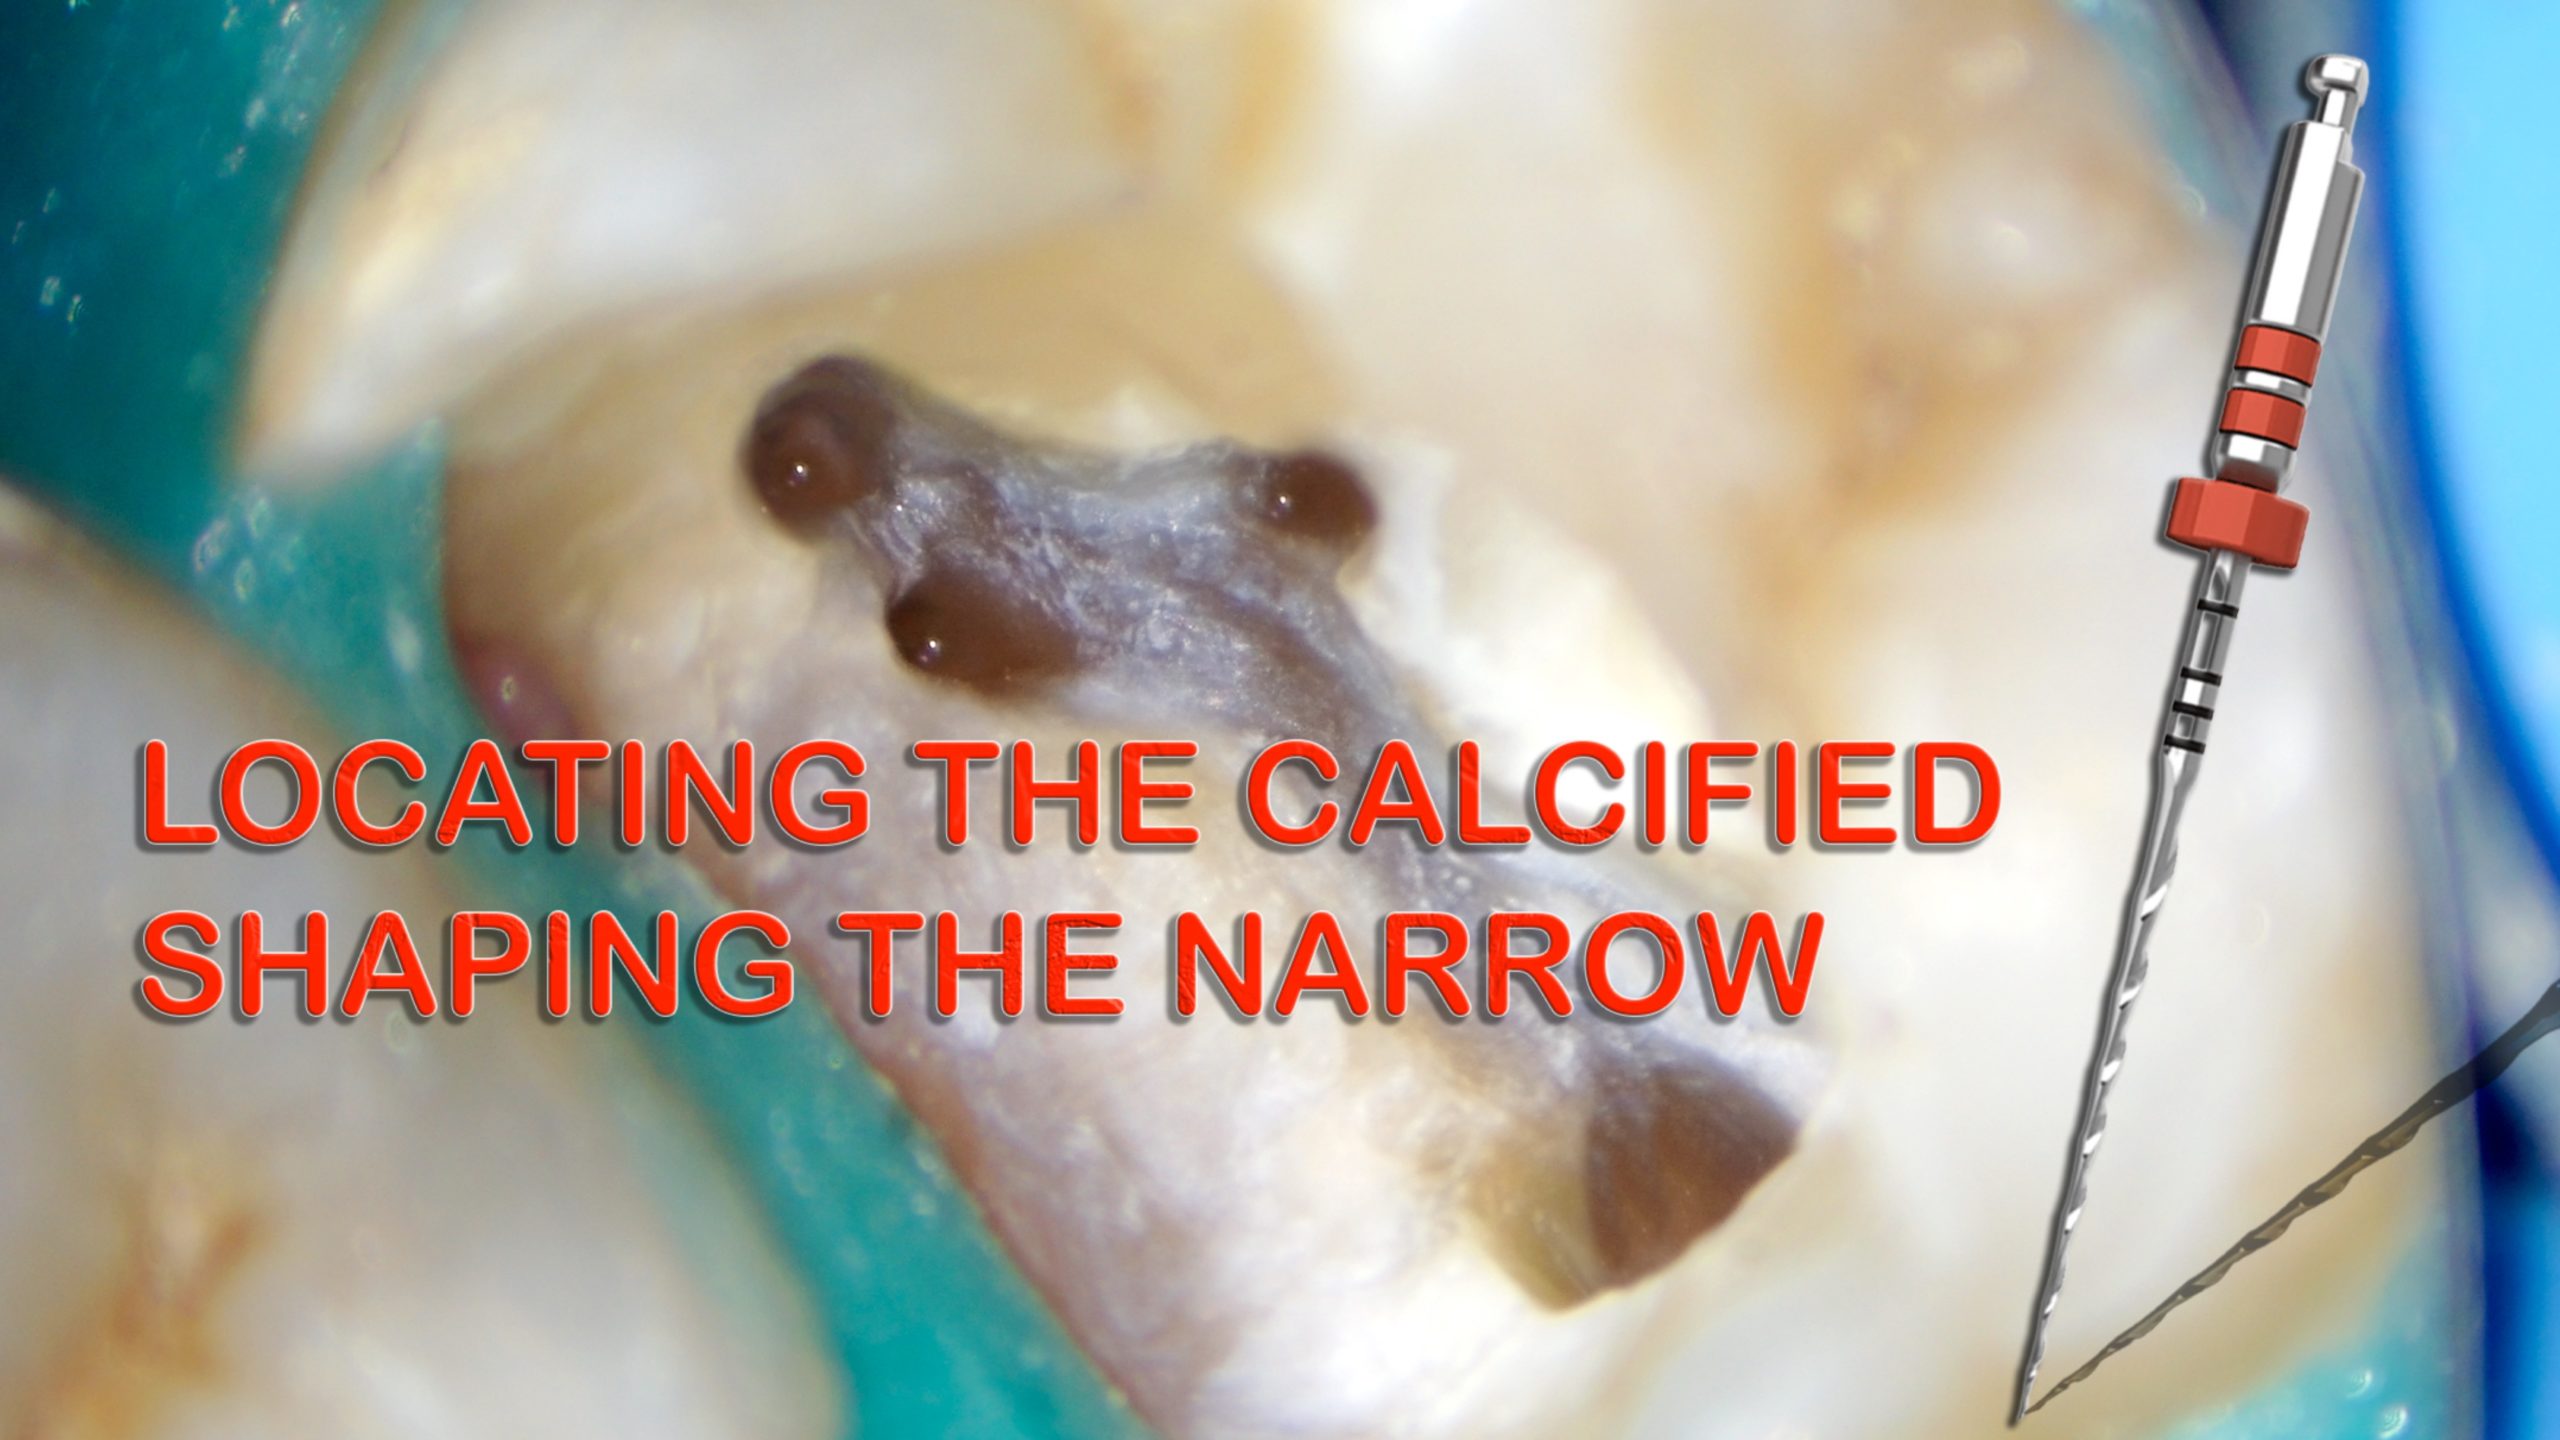 Locating the calcified - Shaping the narrow